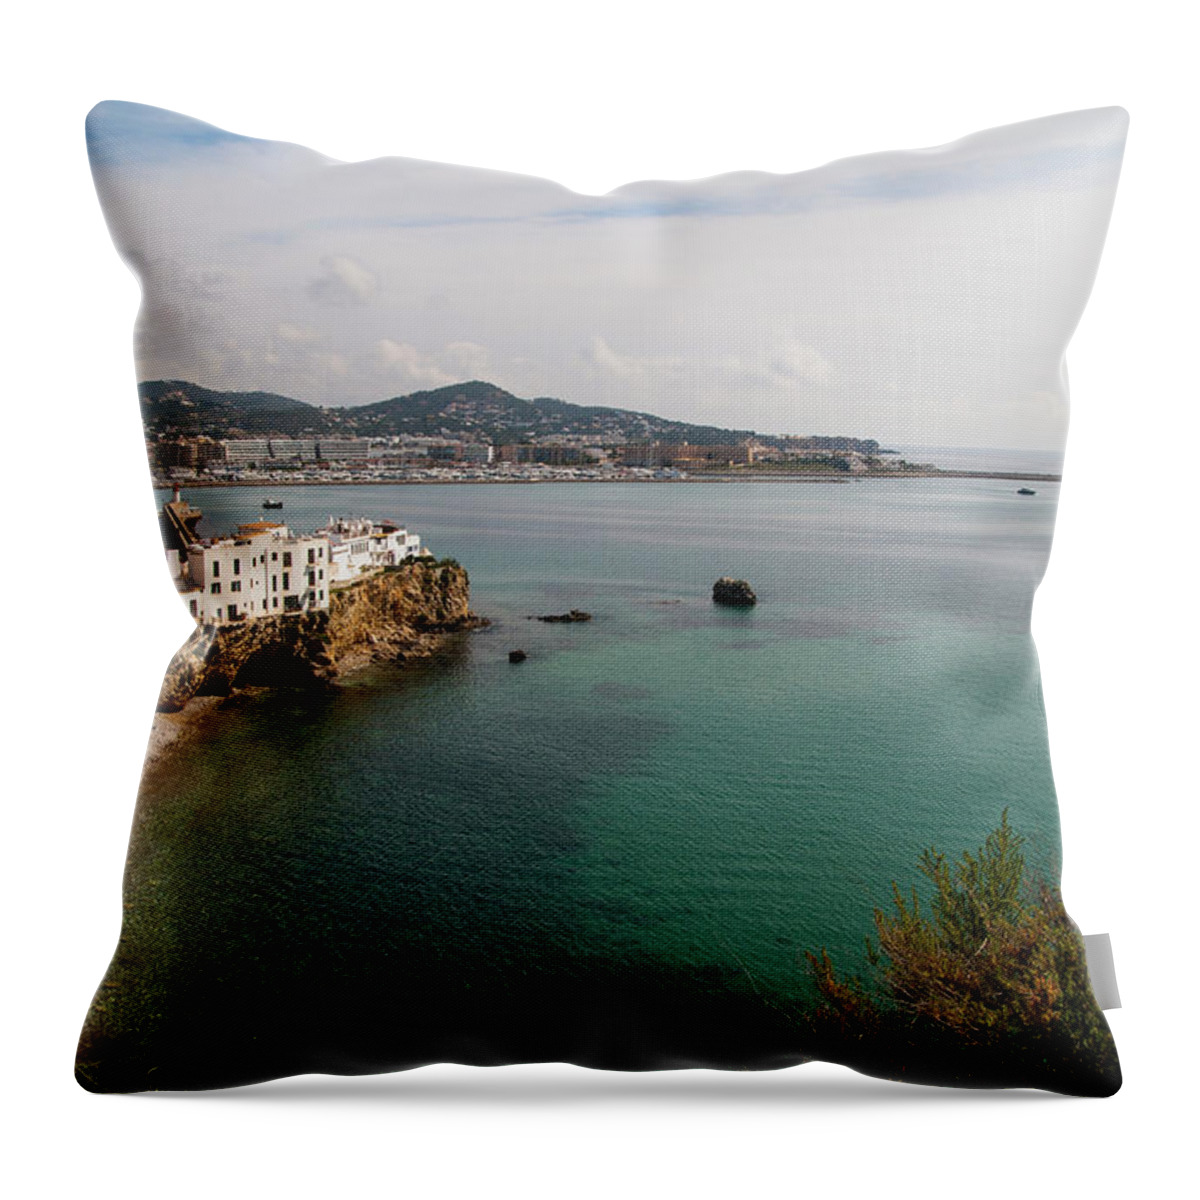 Tranquility Throw Pillow featuring the photograph Sa Penya by M Gómez Photo